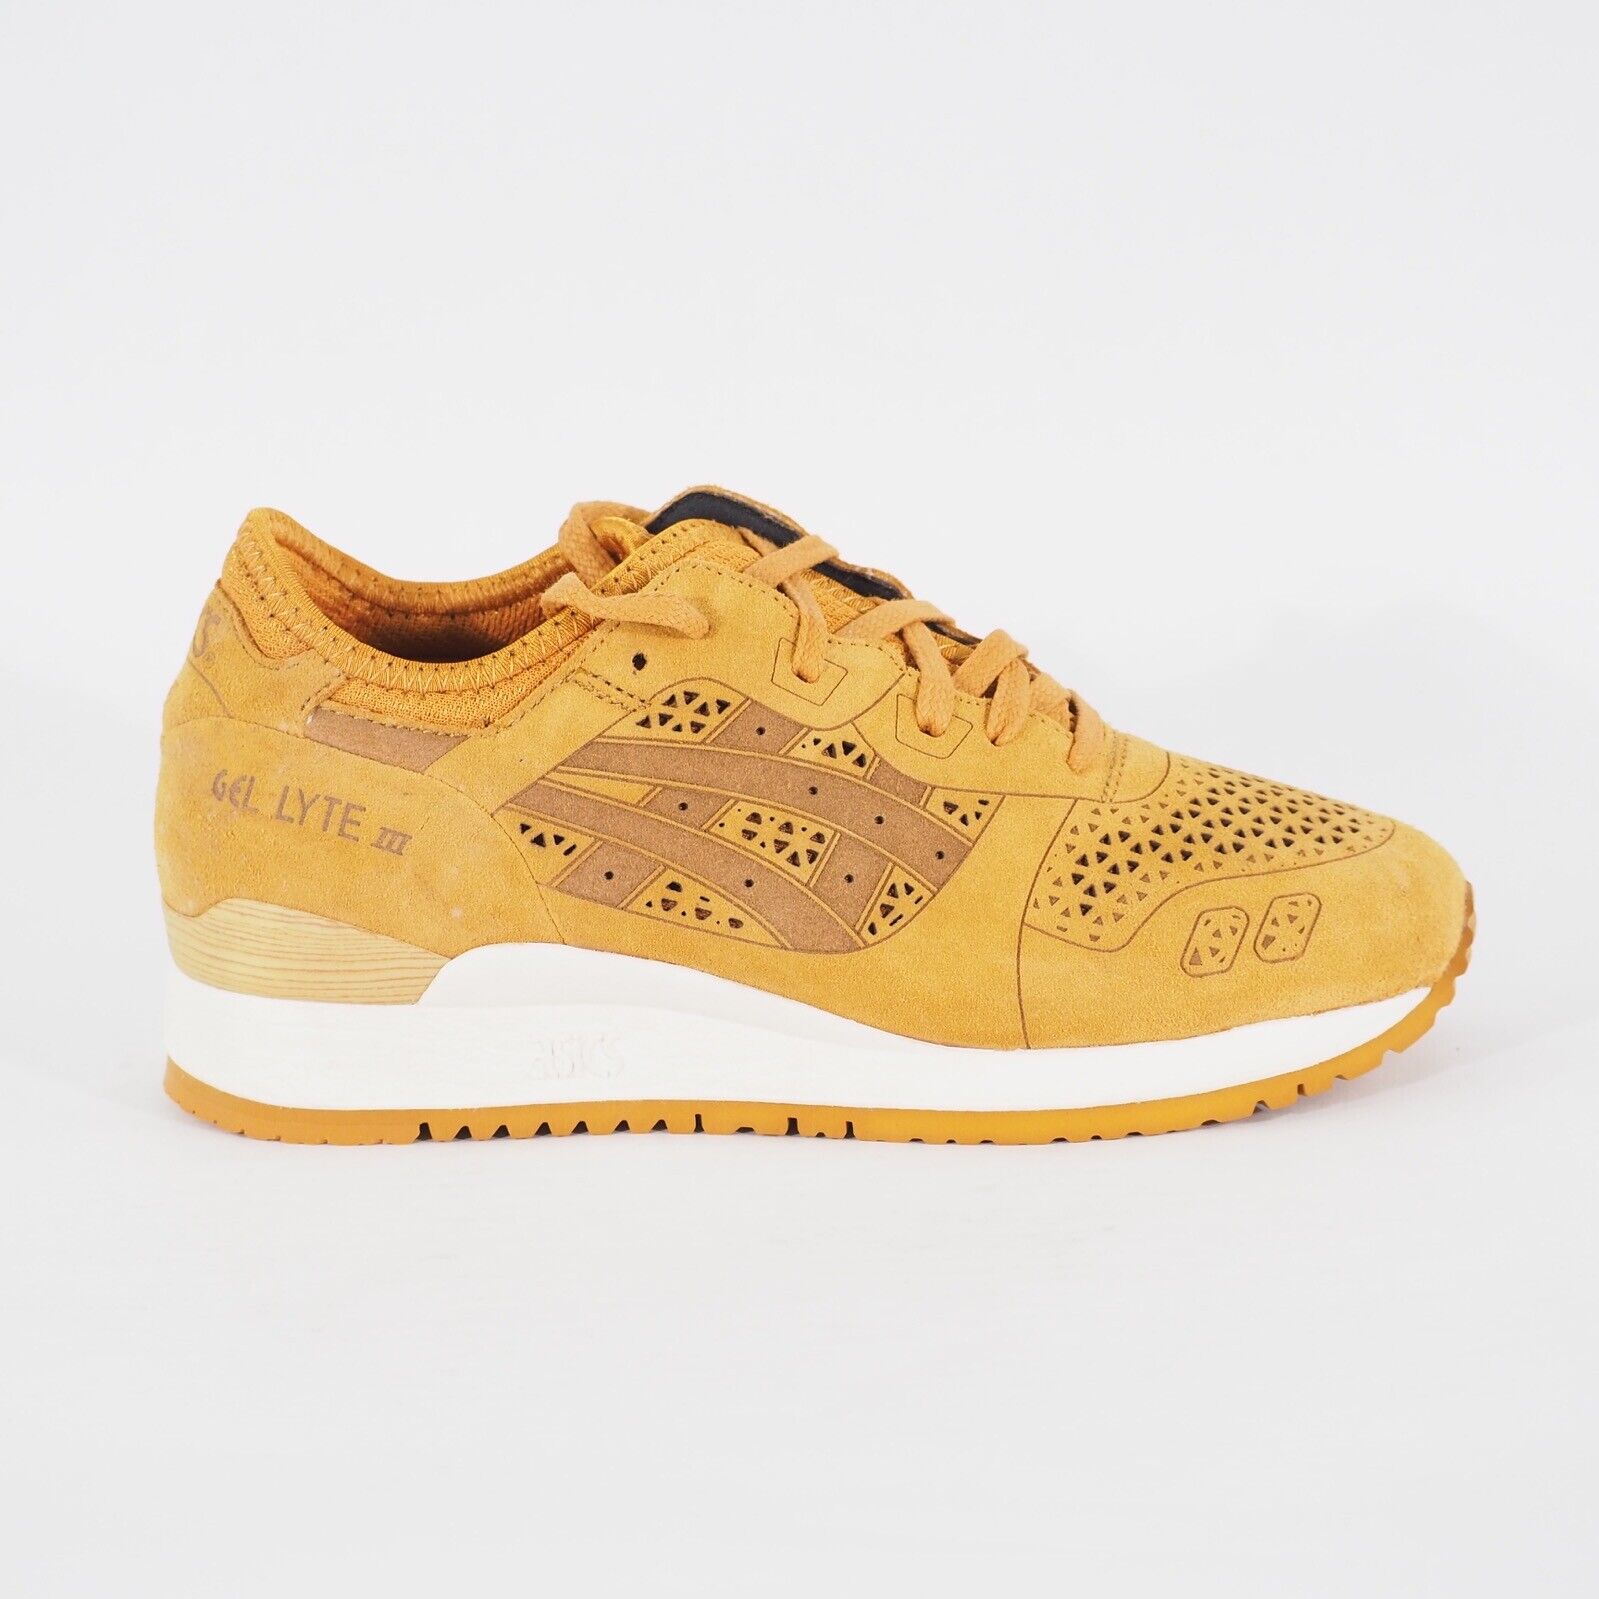 Womens Asics Gel Lyte 3 LC H5E3L Tan Textile Casual Lace Walking Sports Trainers